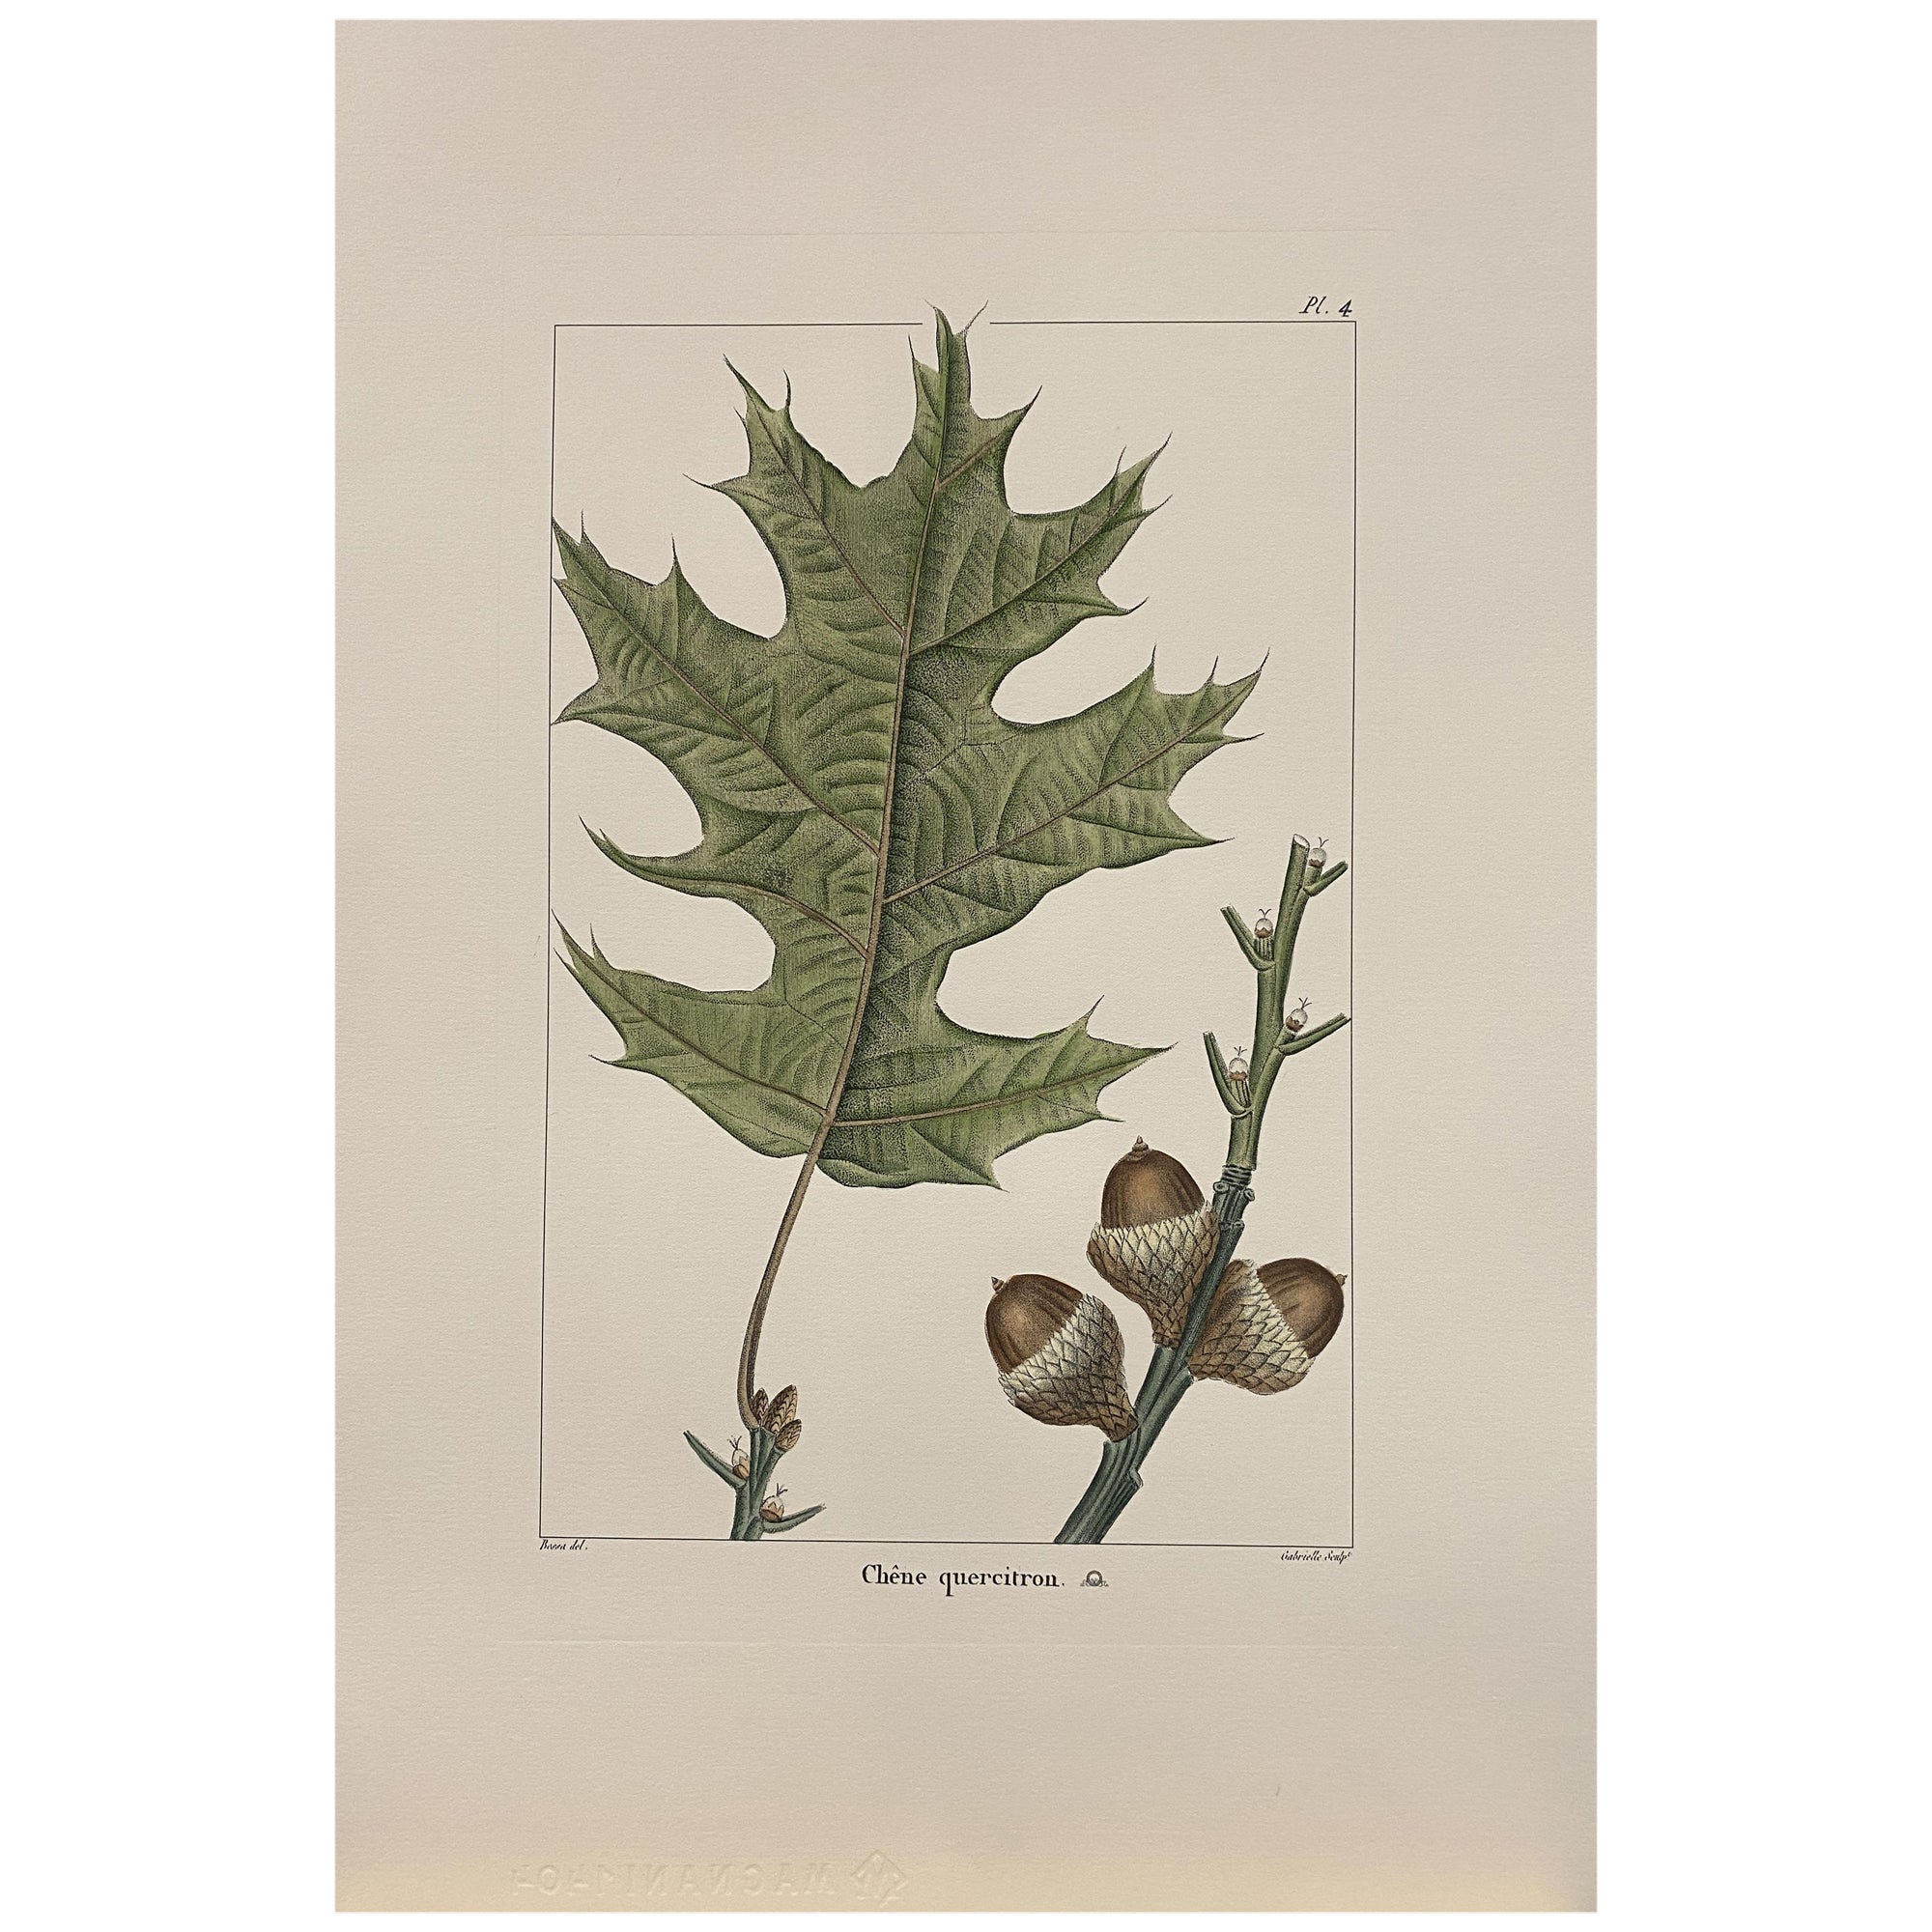 Italian Contemporary Hand Painted Botanical Print "Chene Quercitron" 4 of 4 For Sale